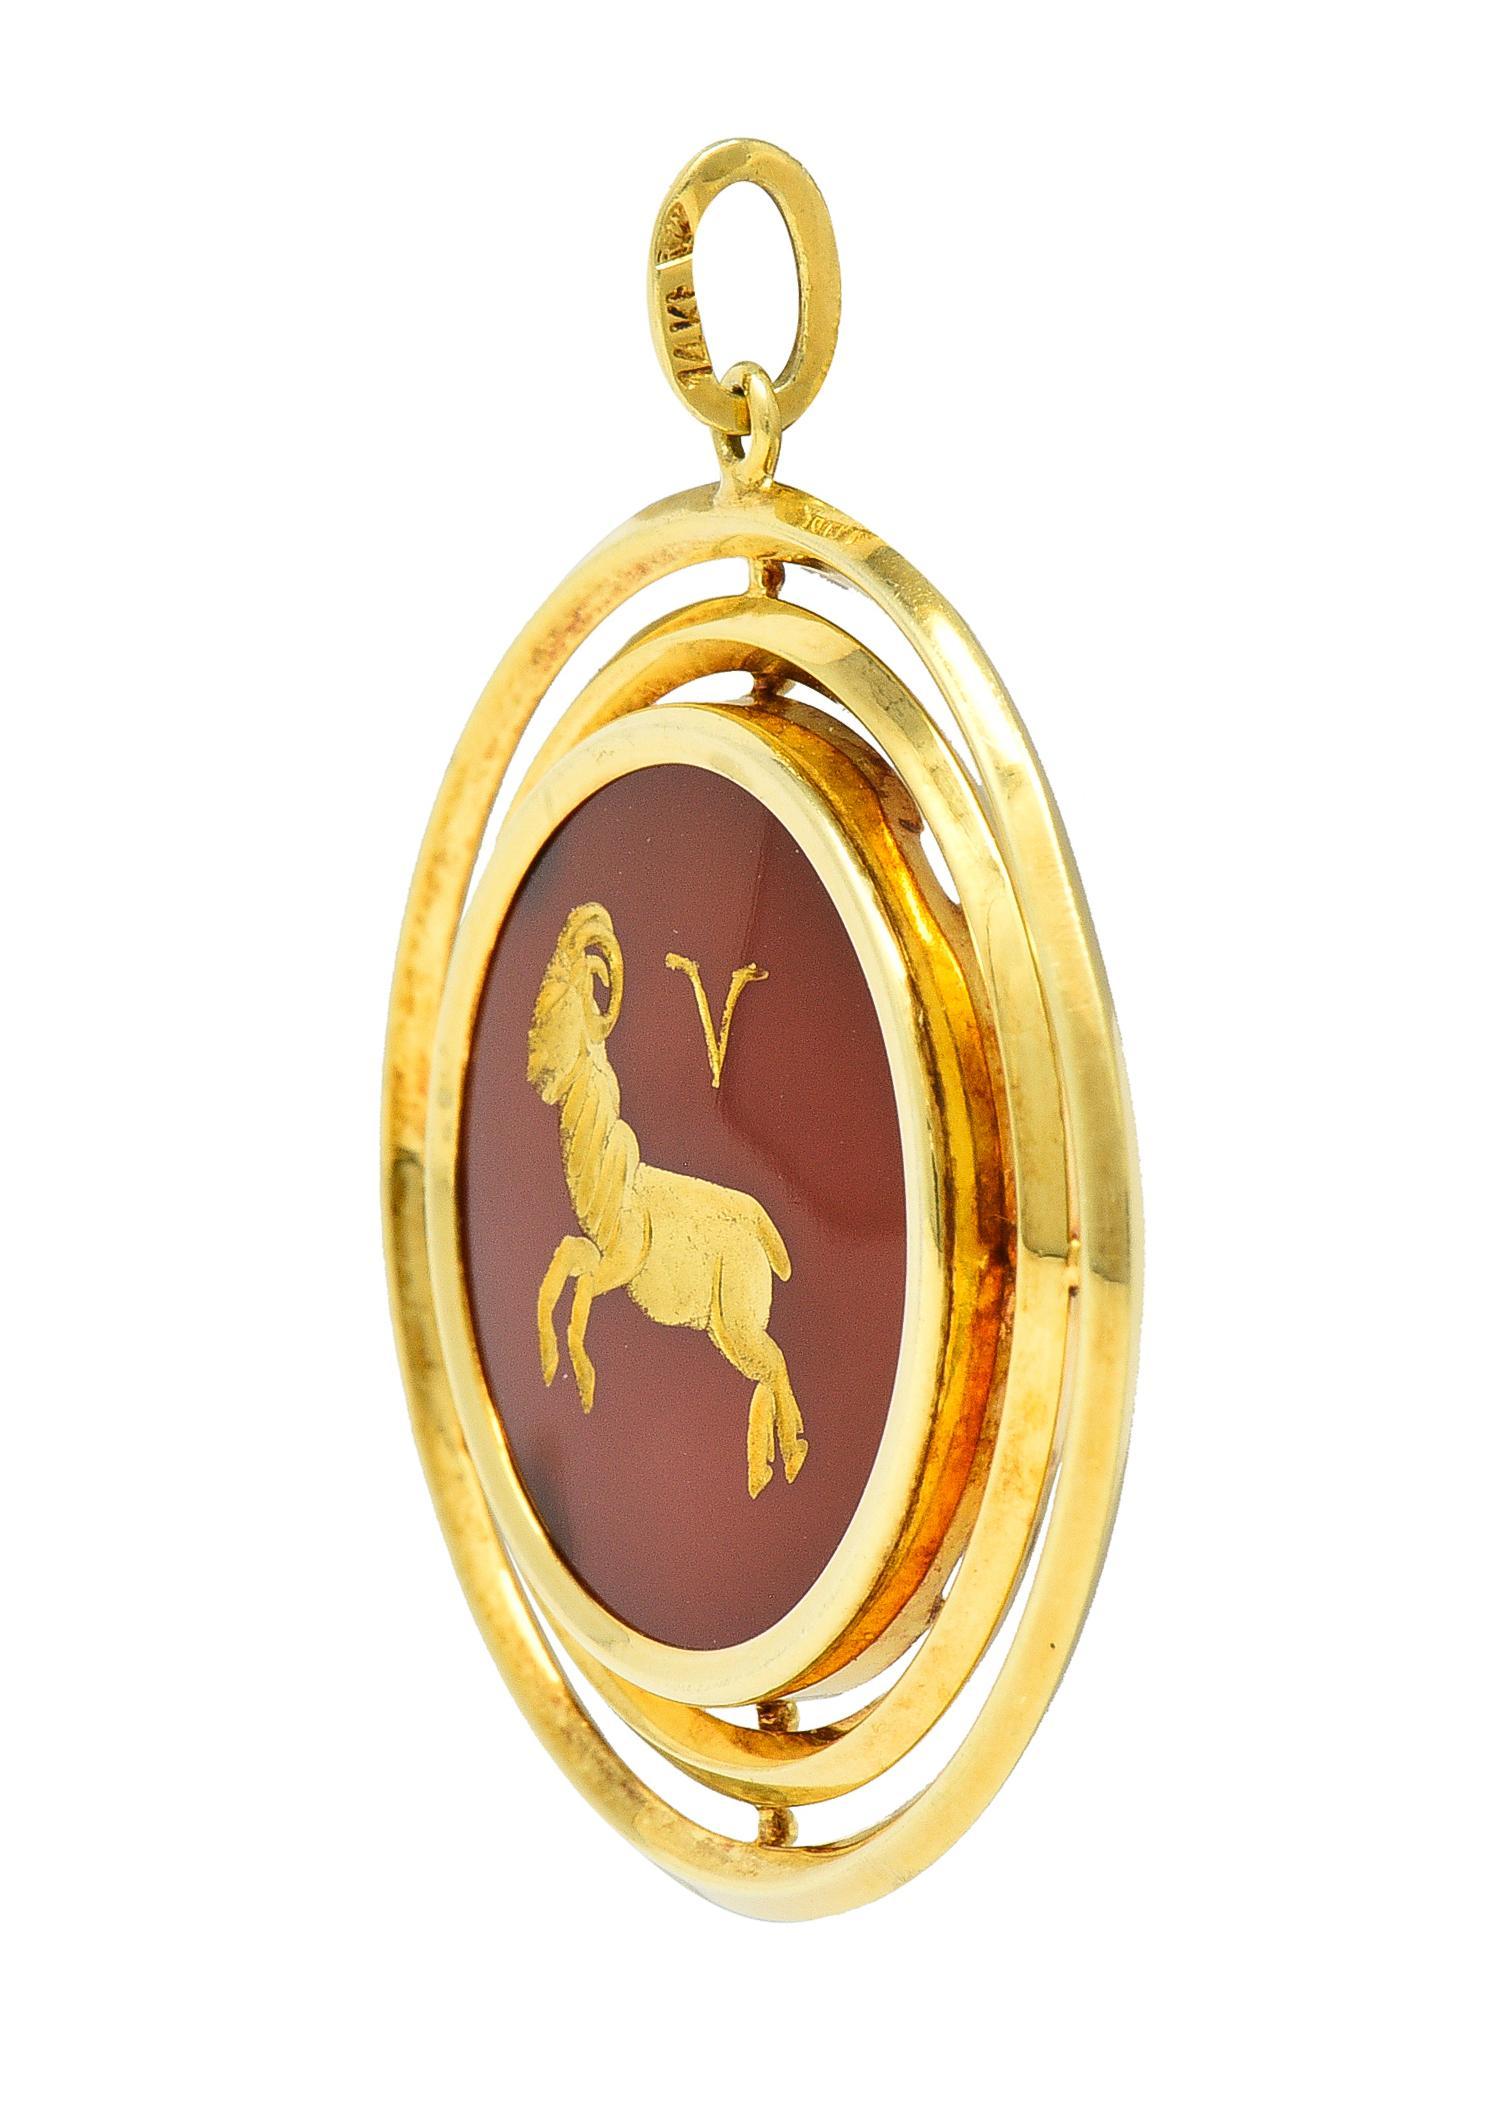 Designed as a round disk-shaped form centering a 20.0 mm round tablet of carnelian 
Translucent medium reddish-orange in color and centering an intaglio carving
Depicting a ram and the astrological symbol for Aries - filled with gold paint
Bezel set